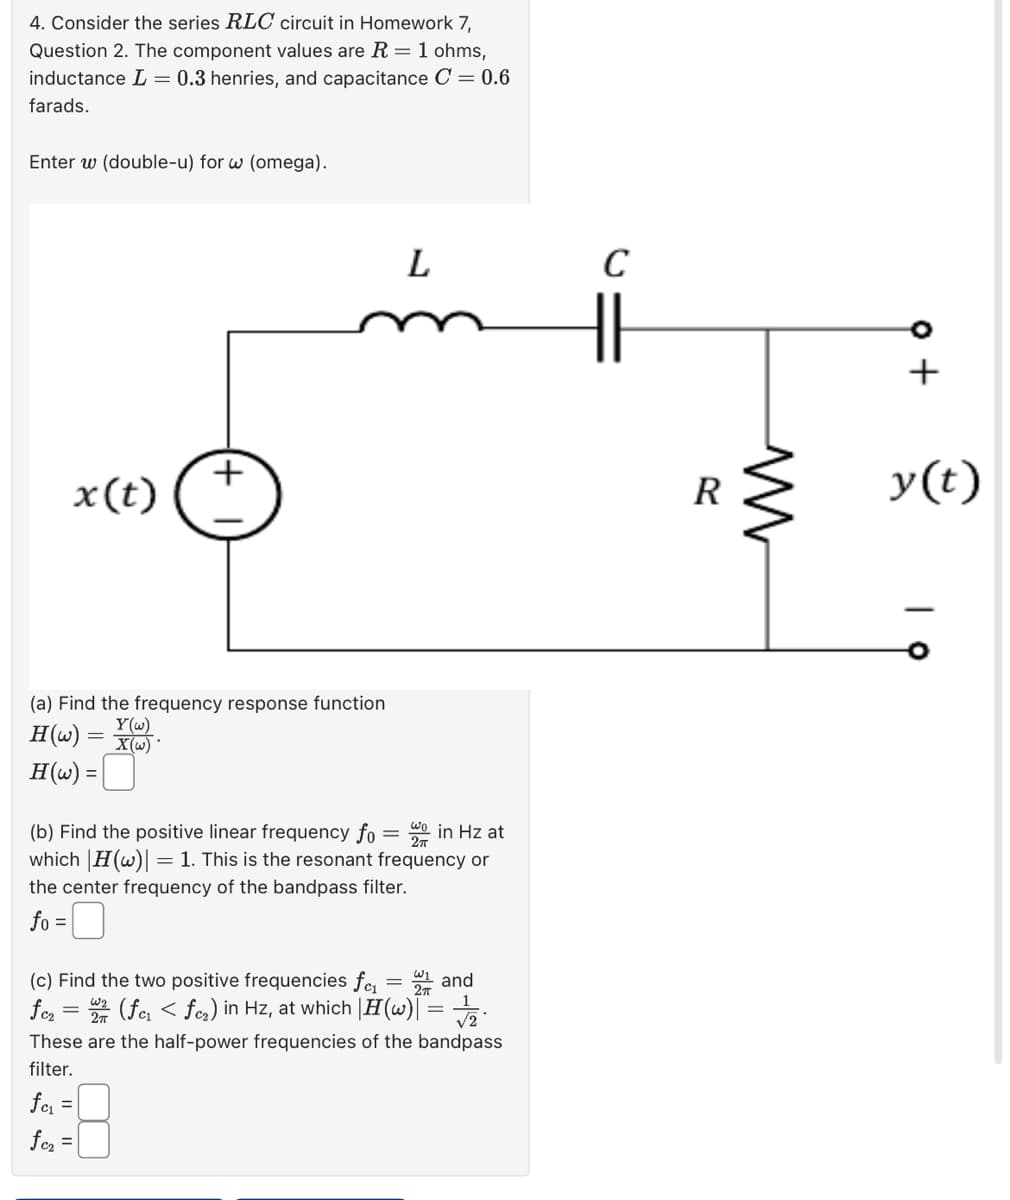 4. Consider the series RLC circuit in Homework 7,
Question 2. The component values are R = 1 ohms,
inductance = 0.3 henries, and capacitance C = 0.6
farads.
Enter w (double-u) for w (omega).
x(t)
L
C
(a) Find the frequency response function
H(w)
Y(w)
= X(w)
H(w) =
(b) Find the positive linear frequency fo = wo in Hz at
which |H(w)
= 1. This is the resonant frequency or
the center frequency of the bandpass filter.
fo
=
(c) Find the two positive frequencies f₁₁ = 1 and
(fcı < fœ₂) in Hz, at which |H(w)| =
fc2
=
These are the half-power frequencies of the bandpass
filter.
fc₁ =
fc₂ =
R
www
y(t)